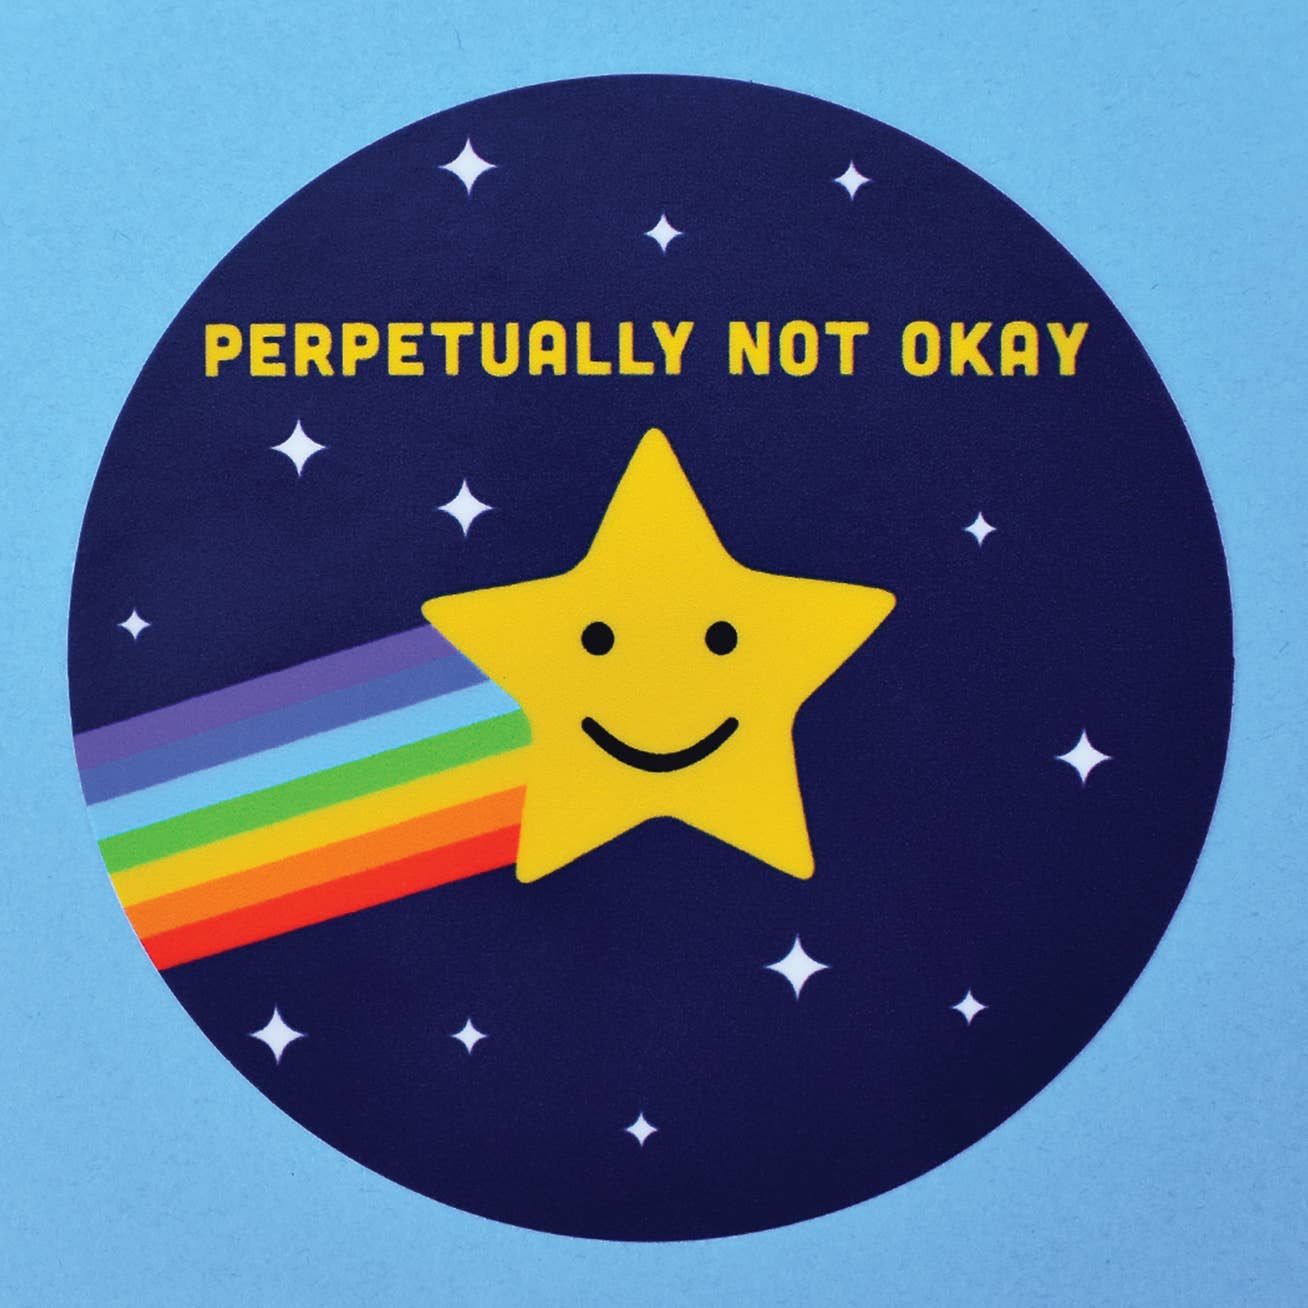 A round navy blue sticker with a yellow shooting star with a rainbow trail is in the middle of the sticker surrounded by small white stars. At the top are the words “Perpetually not okay” in yellow